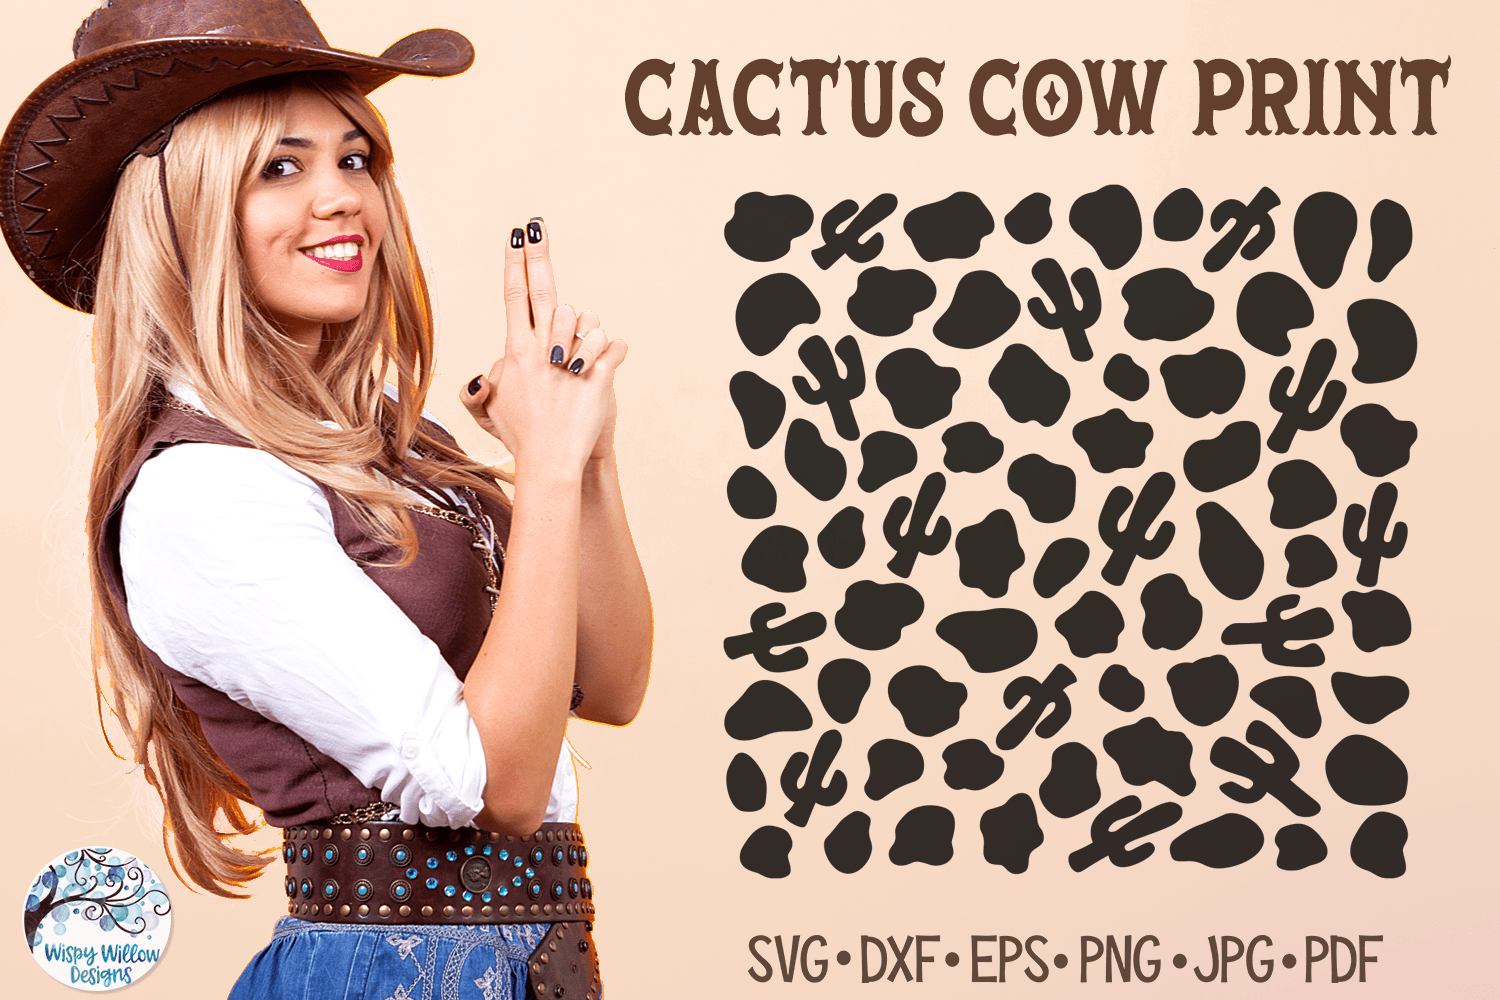 Cactus Cow Print SVG | Western Animal Pattern Wispy Willow Designs Company